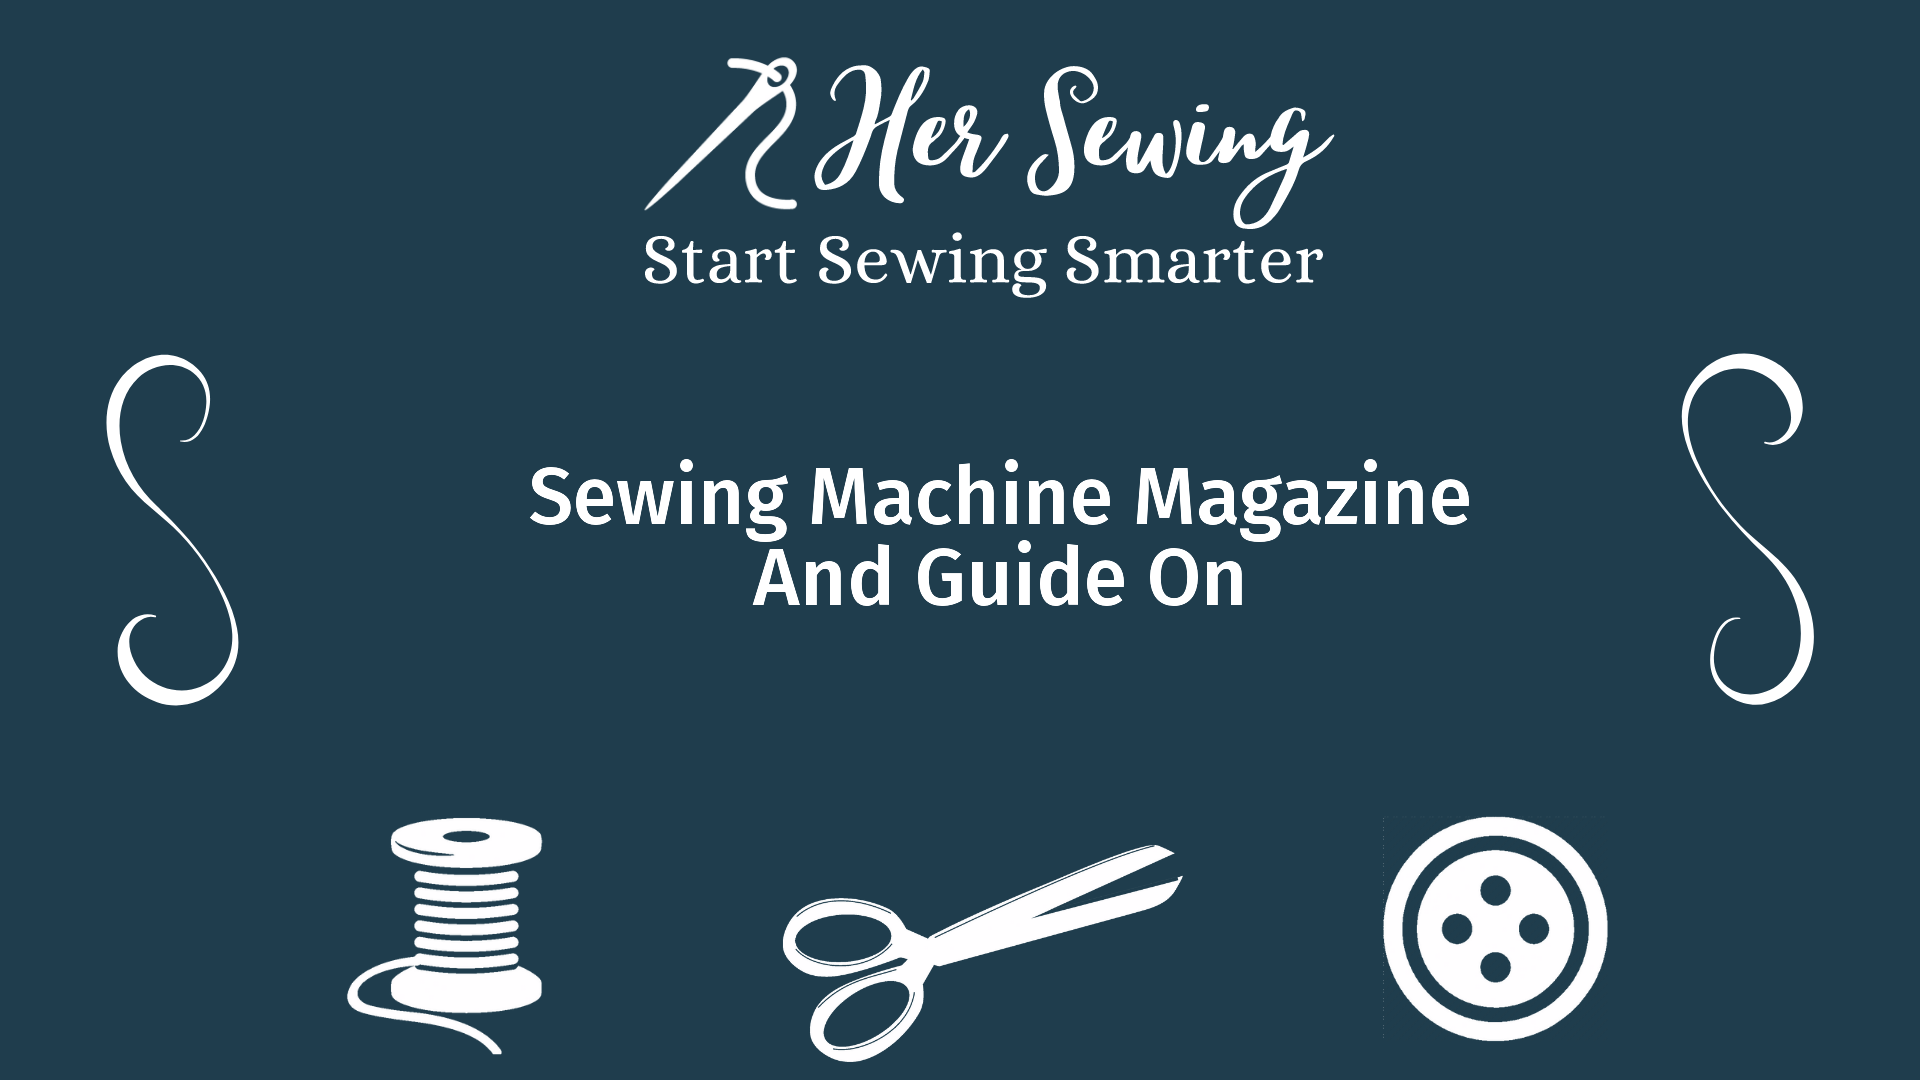 Sewing Machine Magazine And Guide On